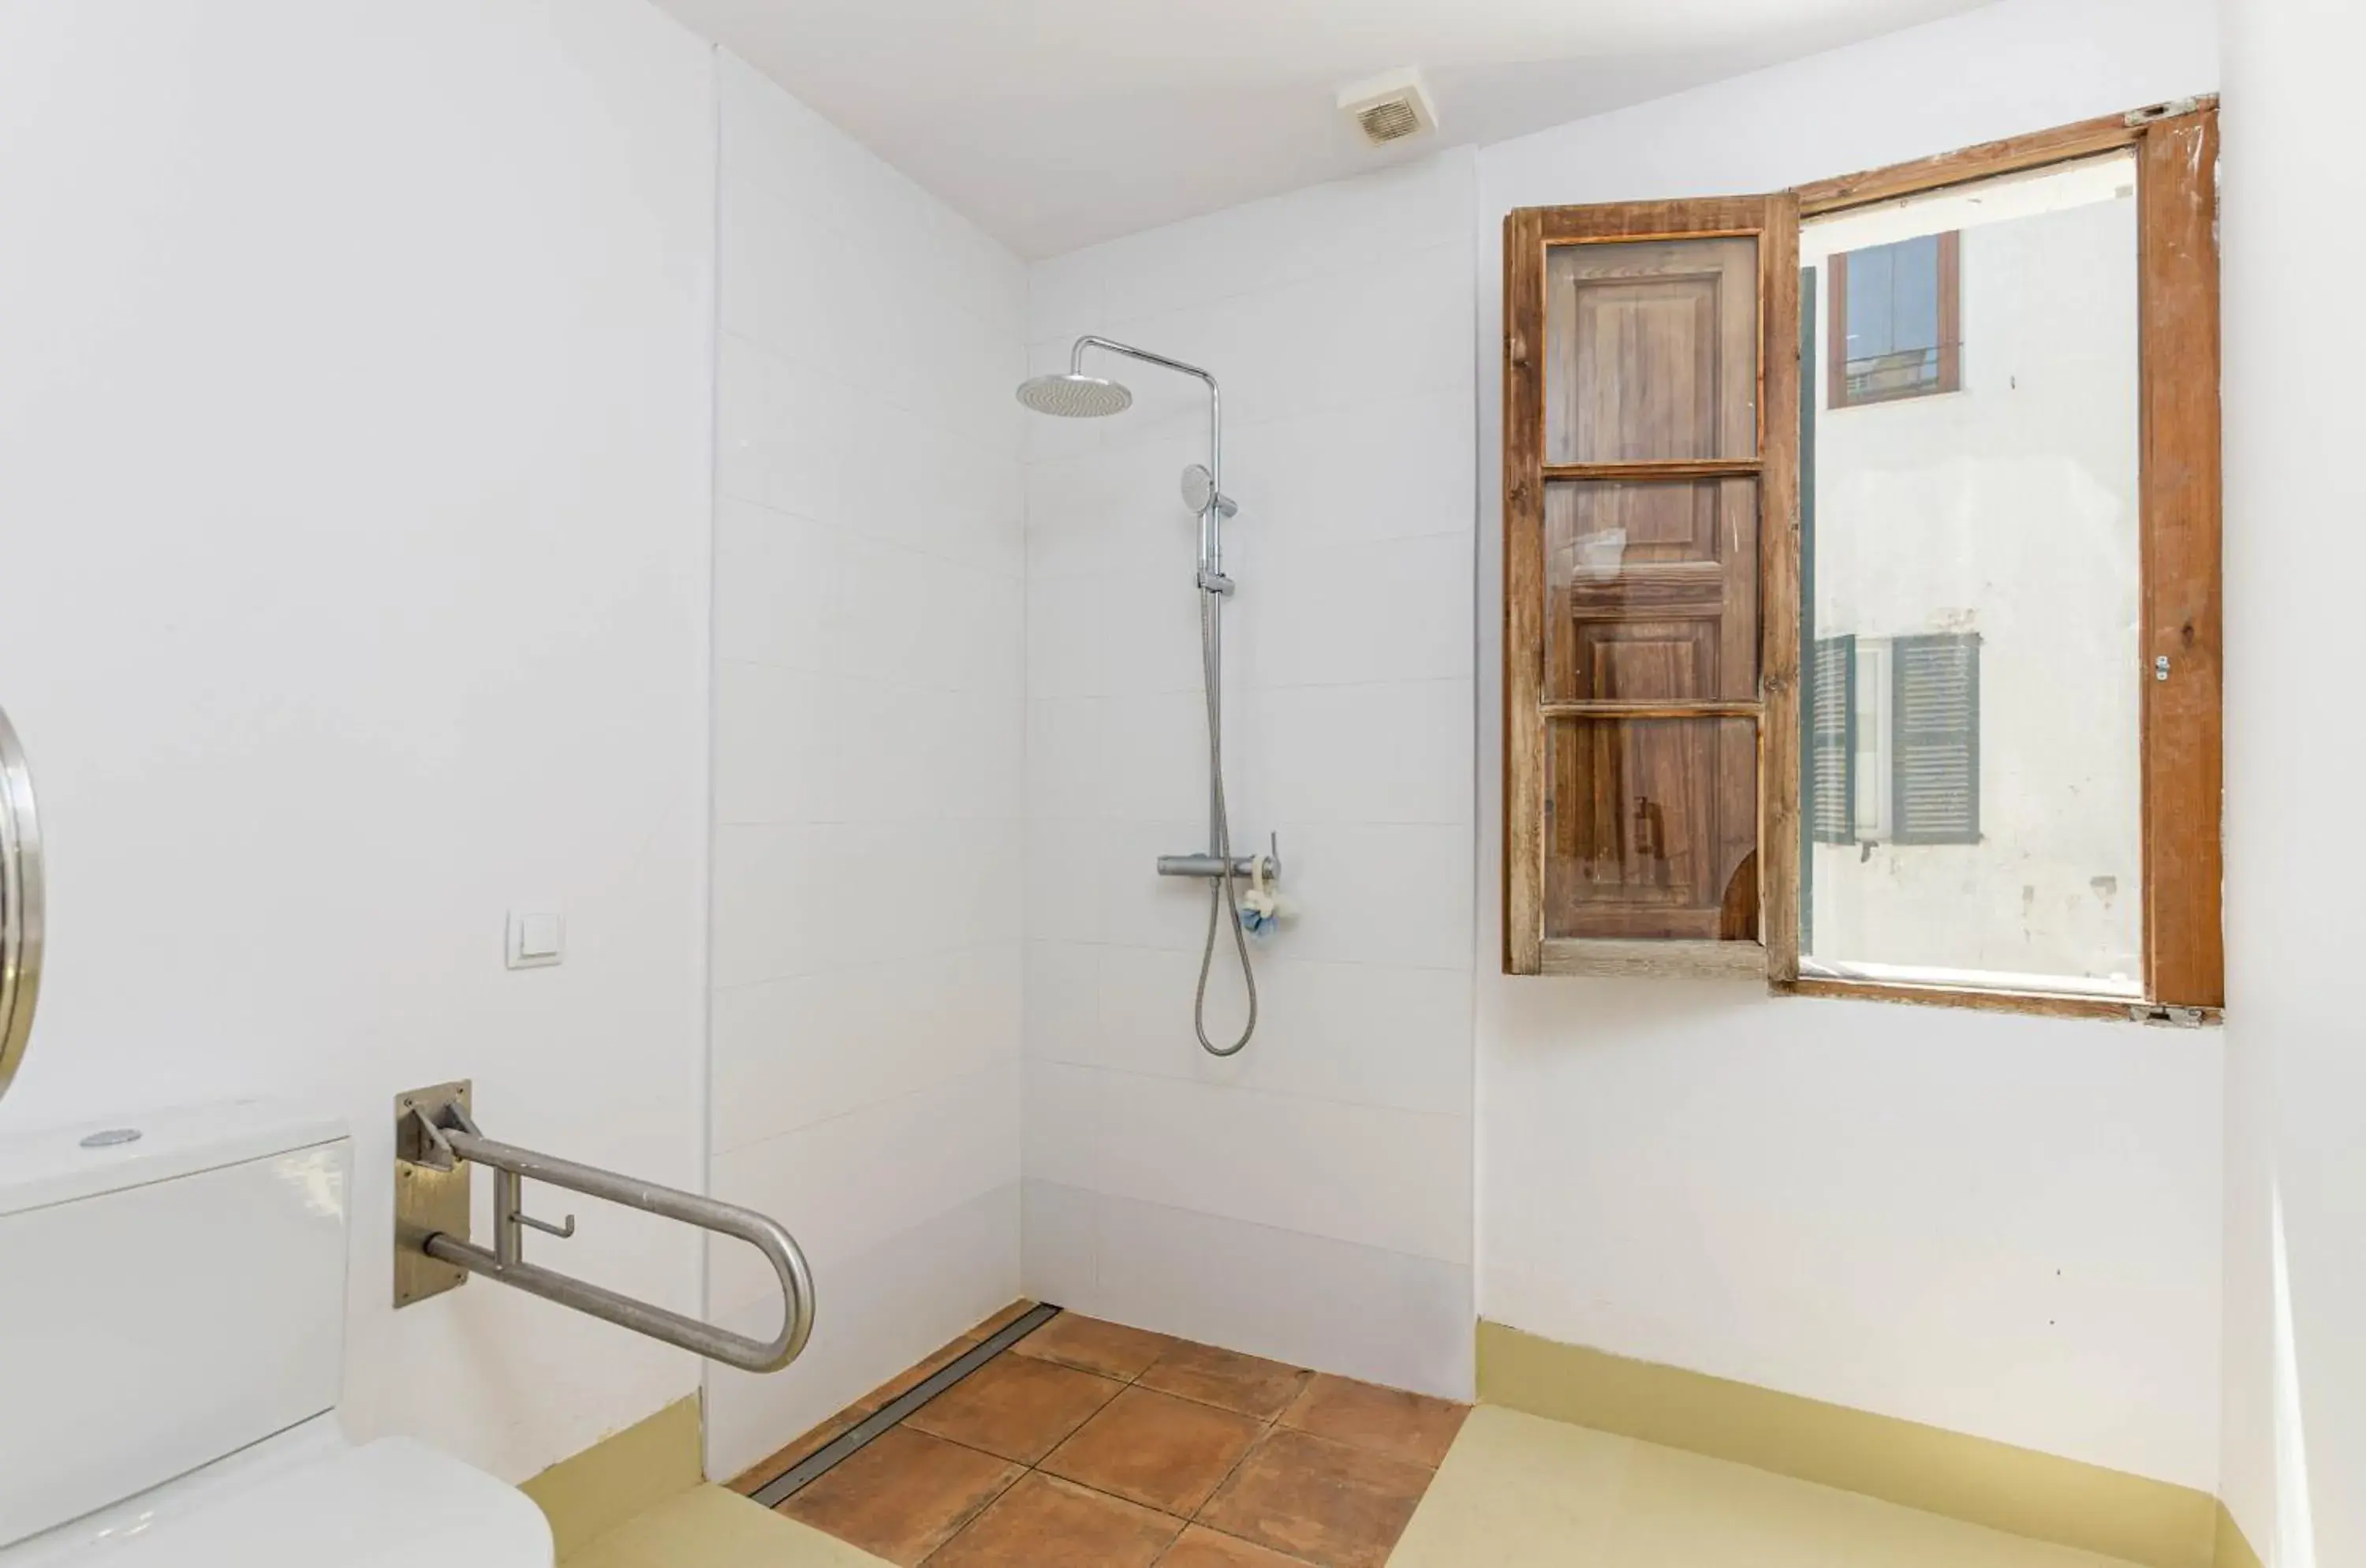 Facility for disabled guests, Bathroom in Urban Hostel Palma - Albergue Juvenil - Youth Hostel